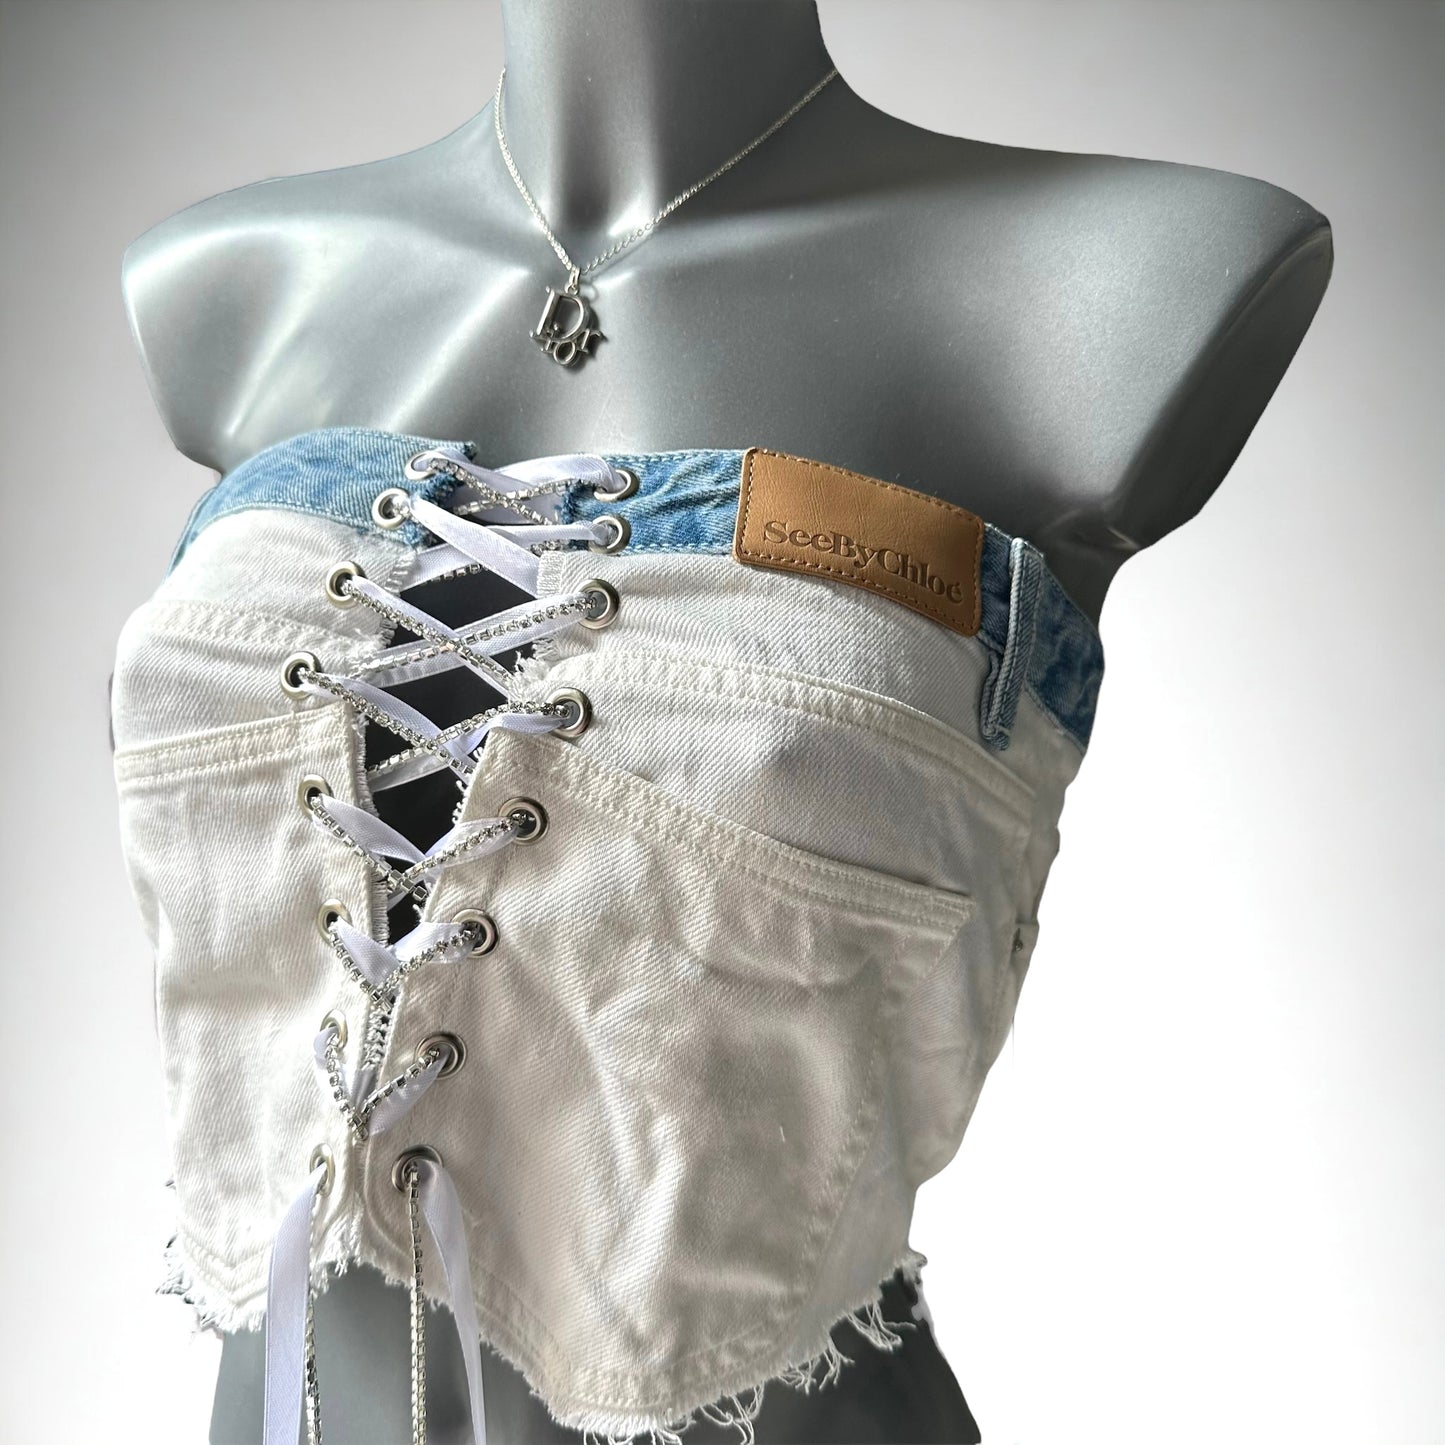 Authentic Chloe Jeans Reworked into a White Denim Corset Top 6 8 10